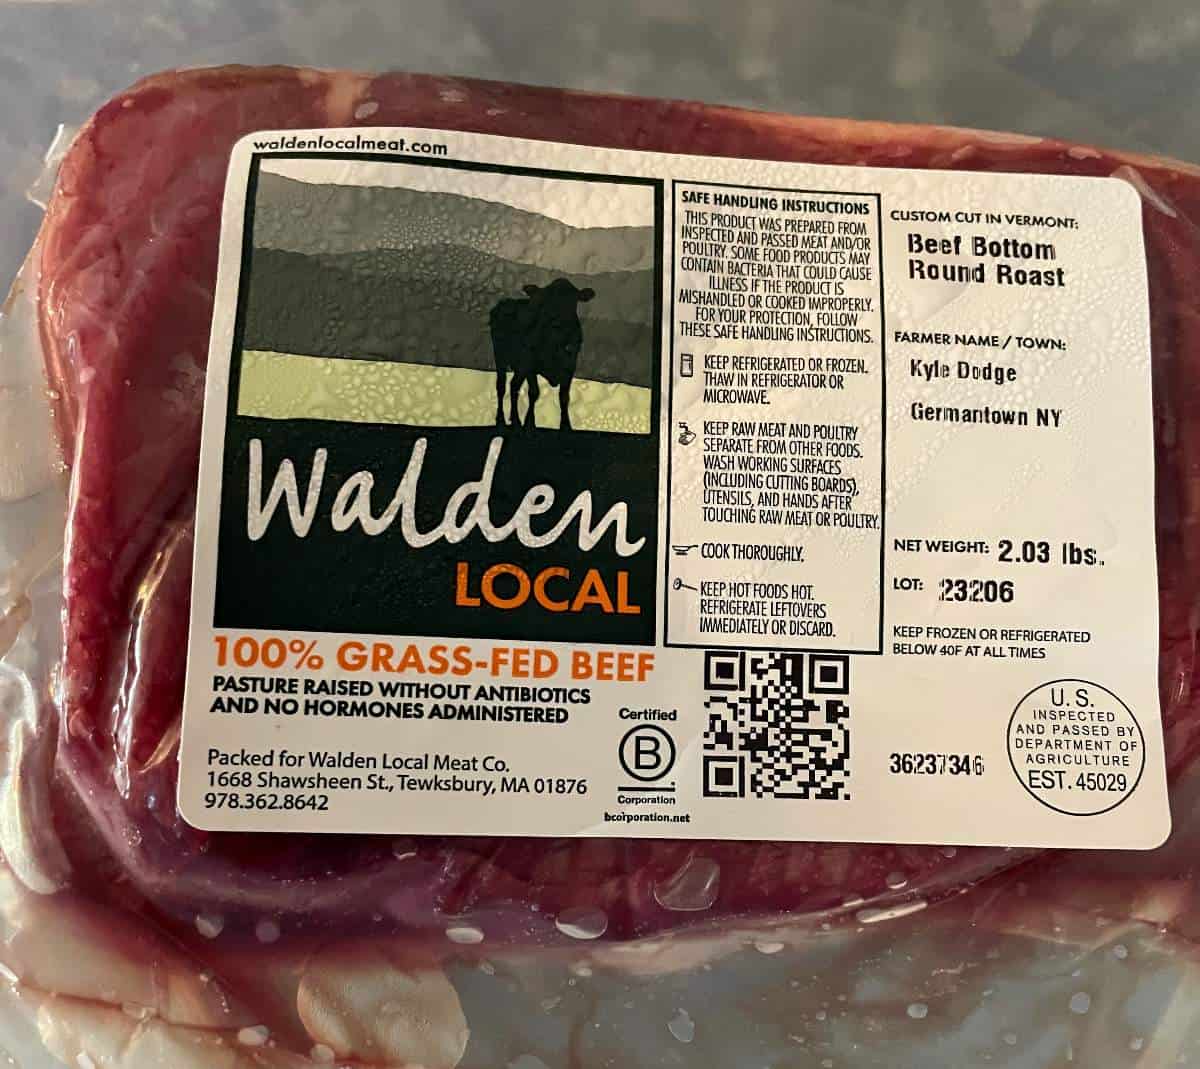 a package of Walden Local Bottom Round Roast.